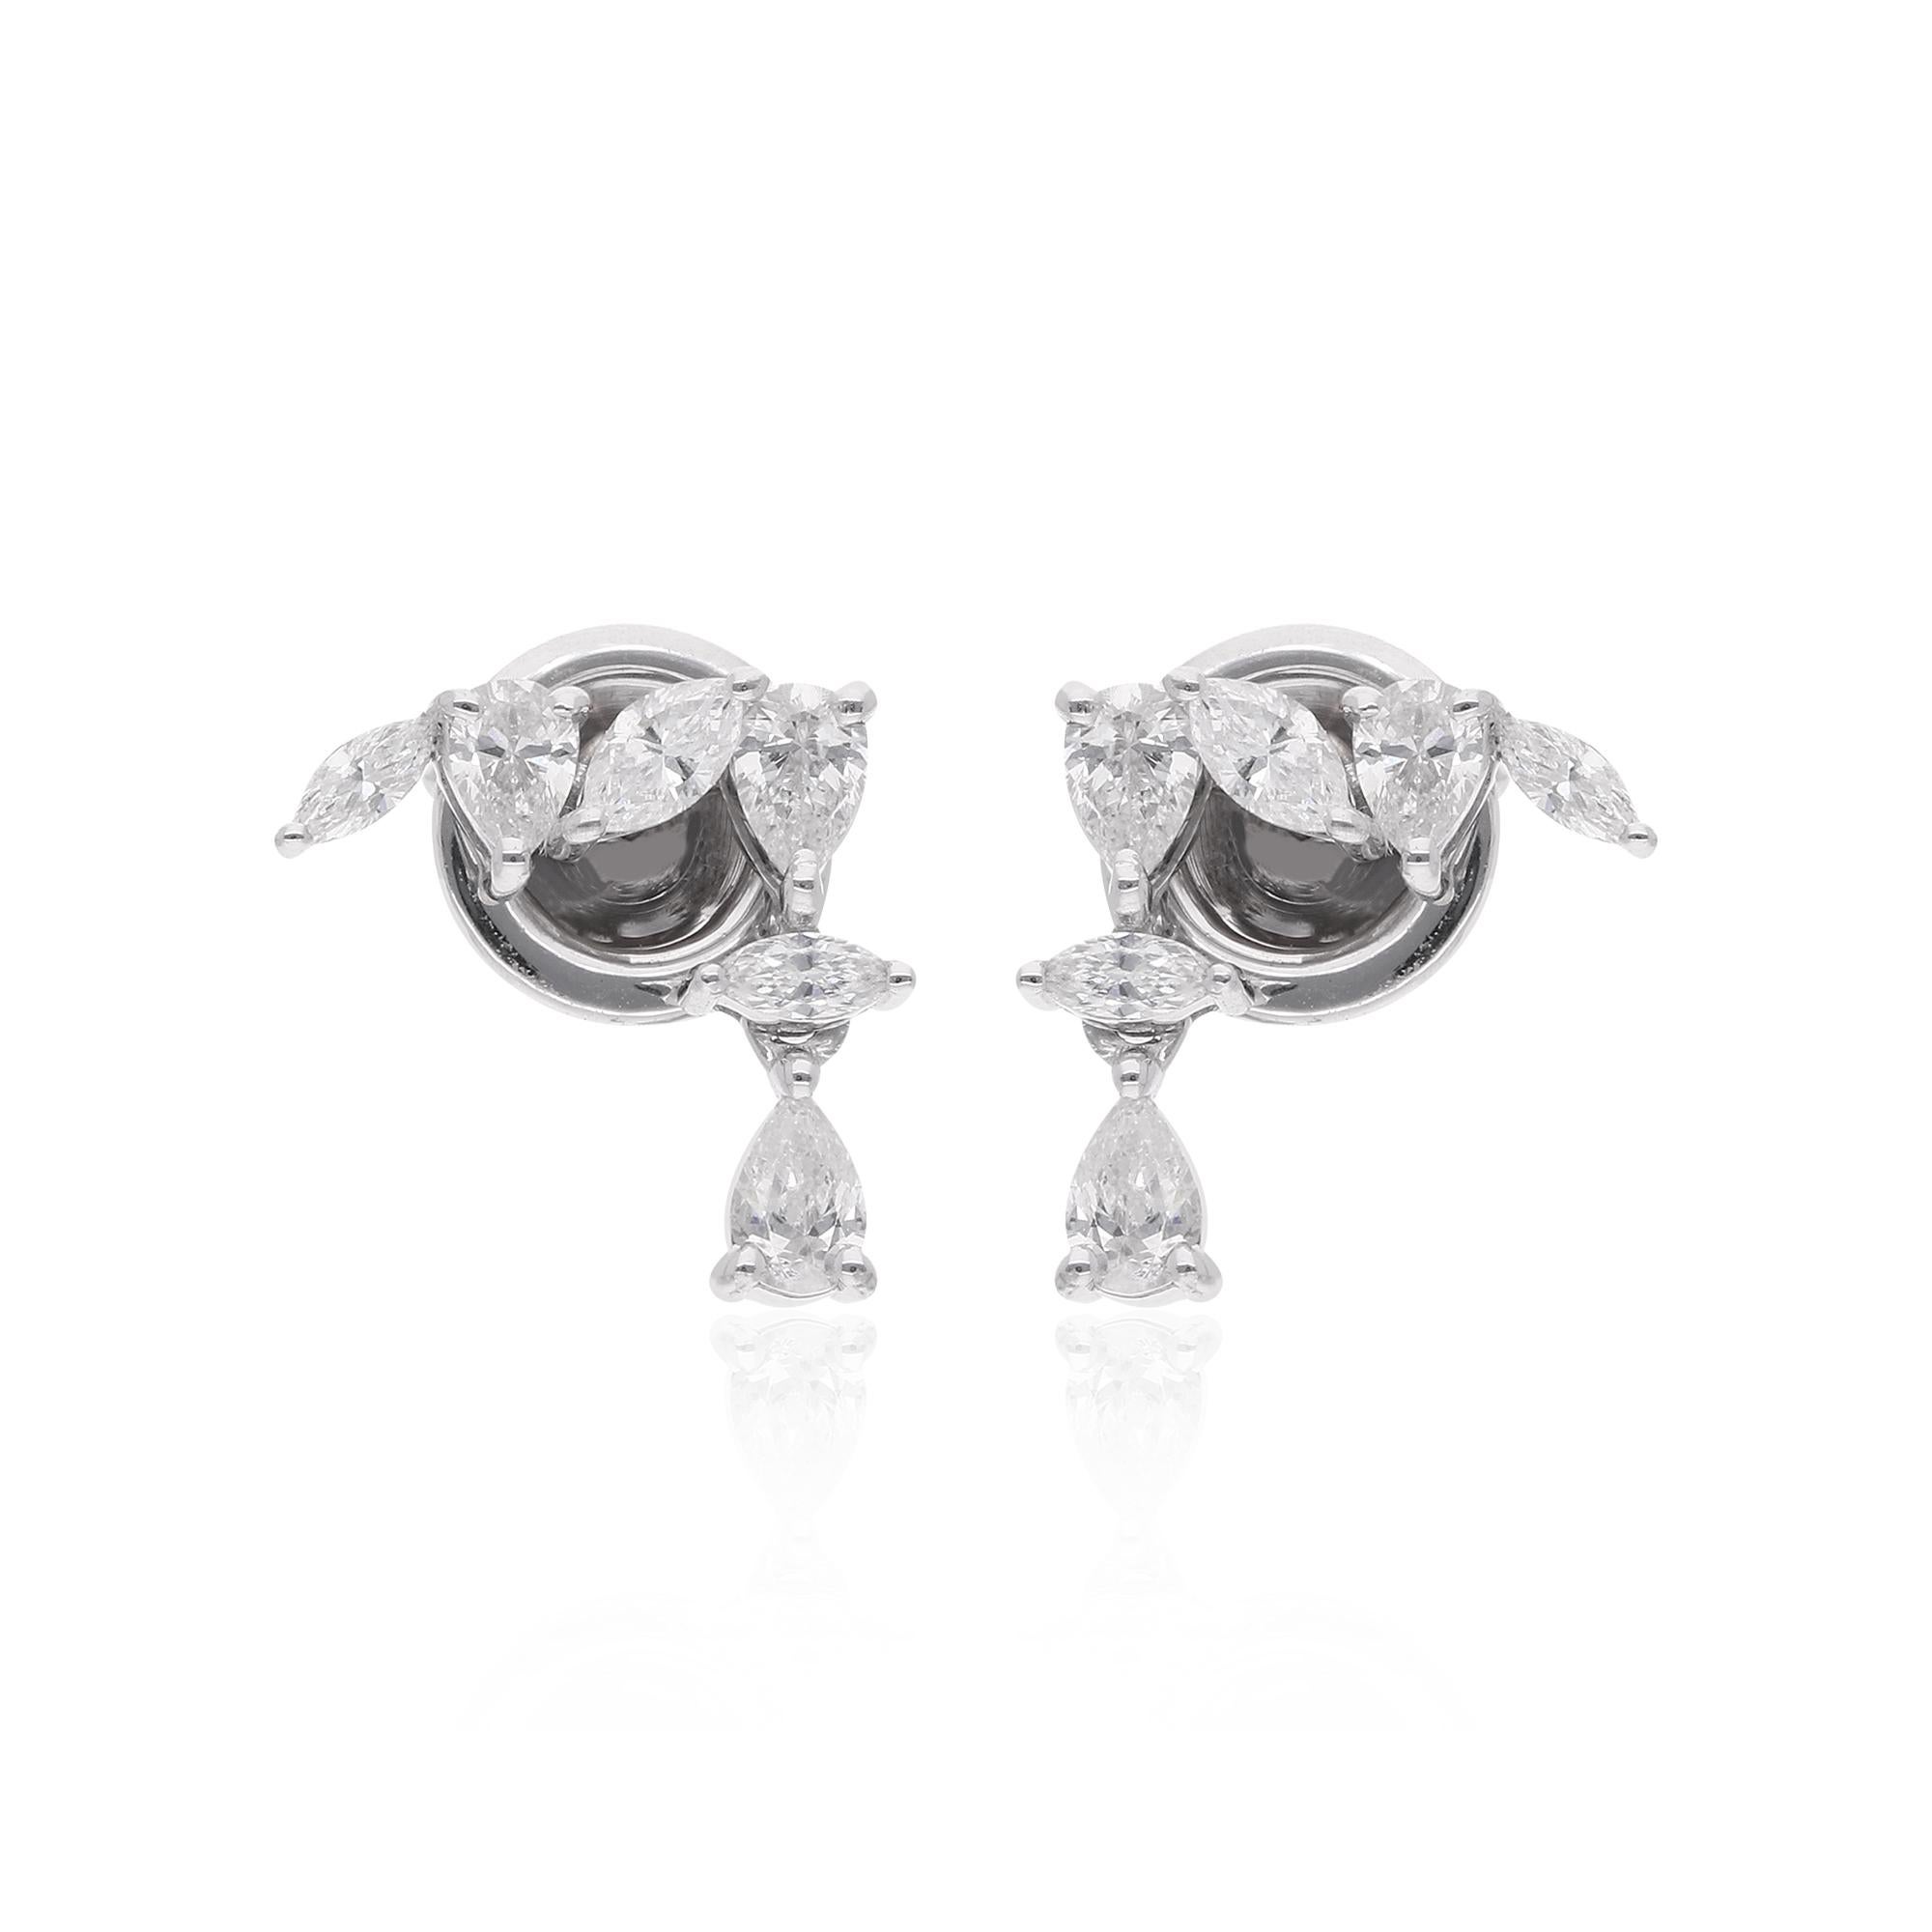 Modern Natural 2.91 Carat Marquise & Pear Diamond Earrings 14 Karat White Gold Jewelry For Sale